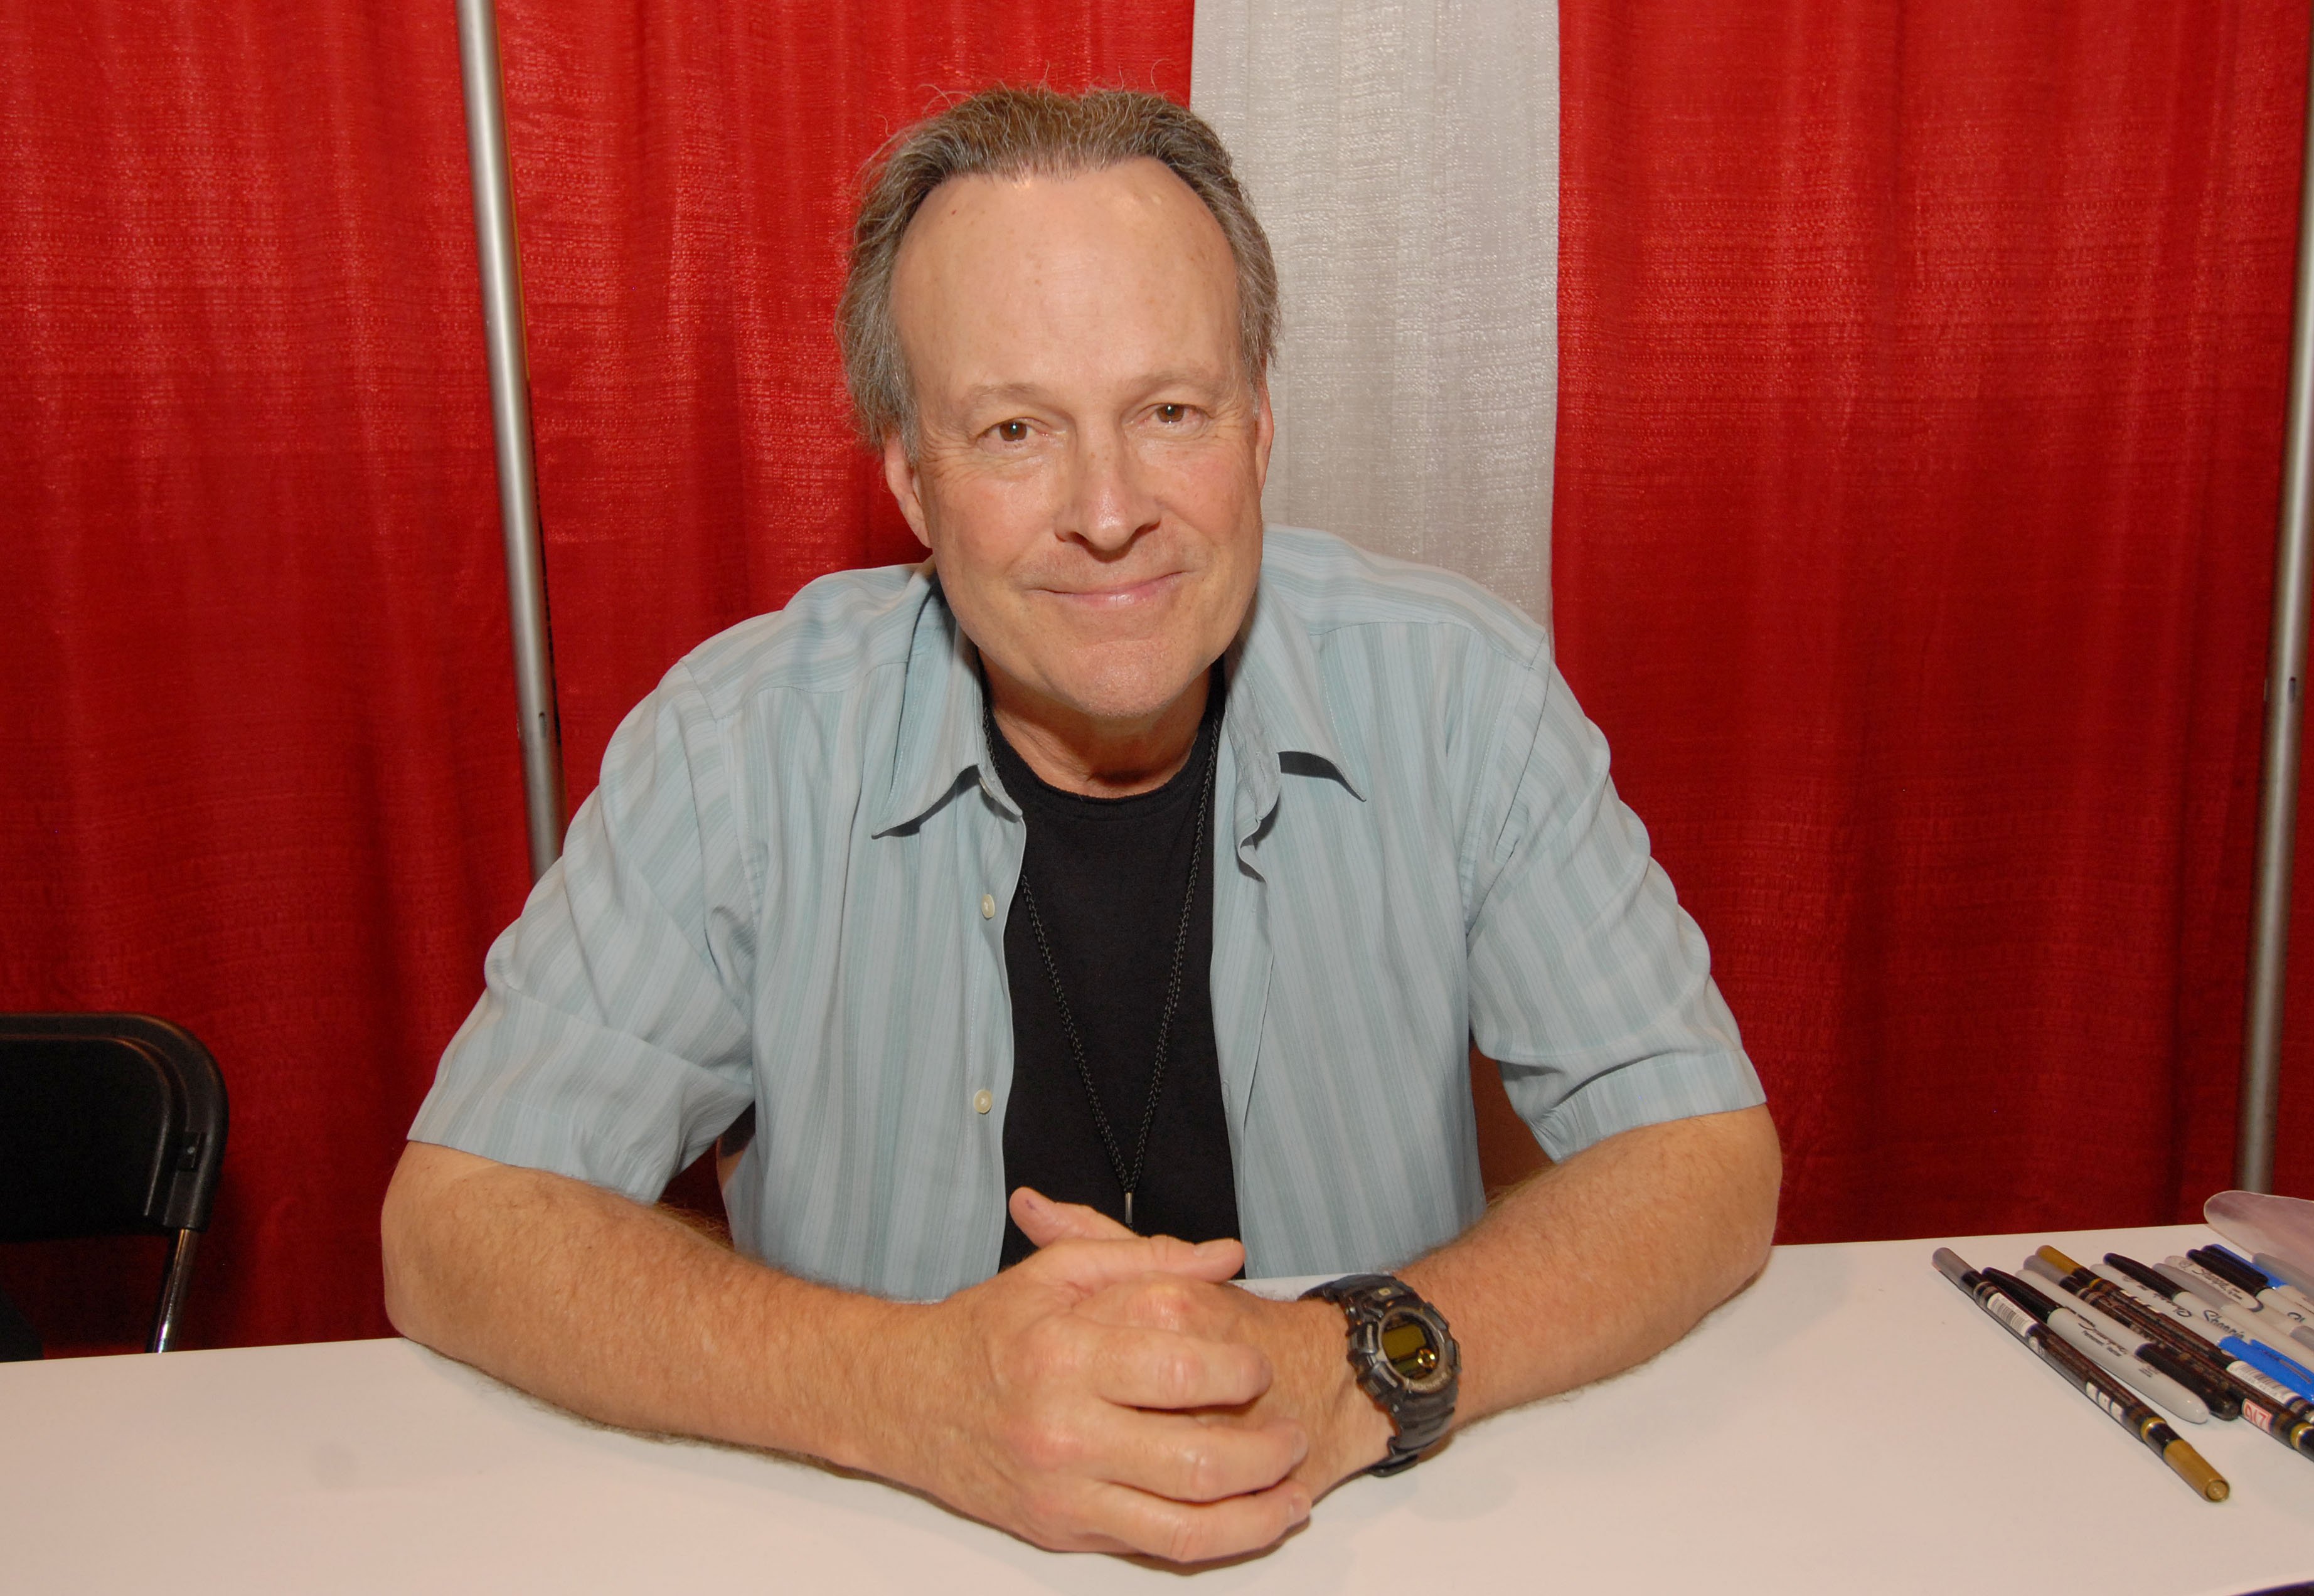 Dwight Schultz attends the first day of Motor City Comic Con 2012 on May 18, 2012 in Novi, Michigan. | Photo: Getty Images